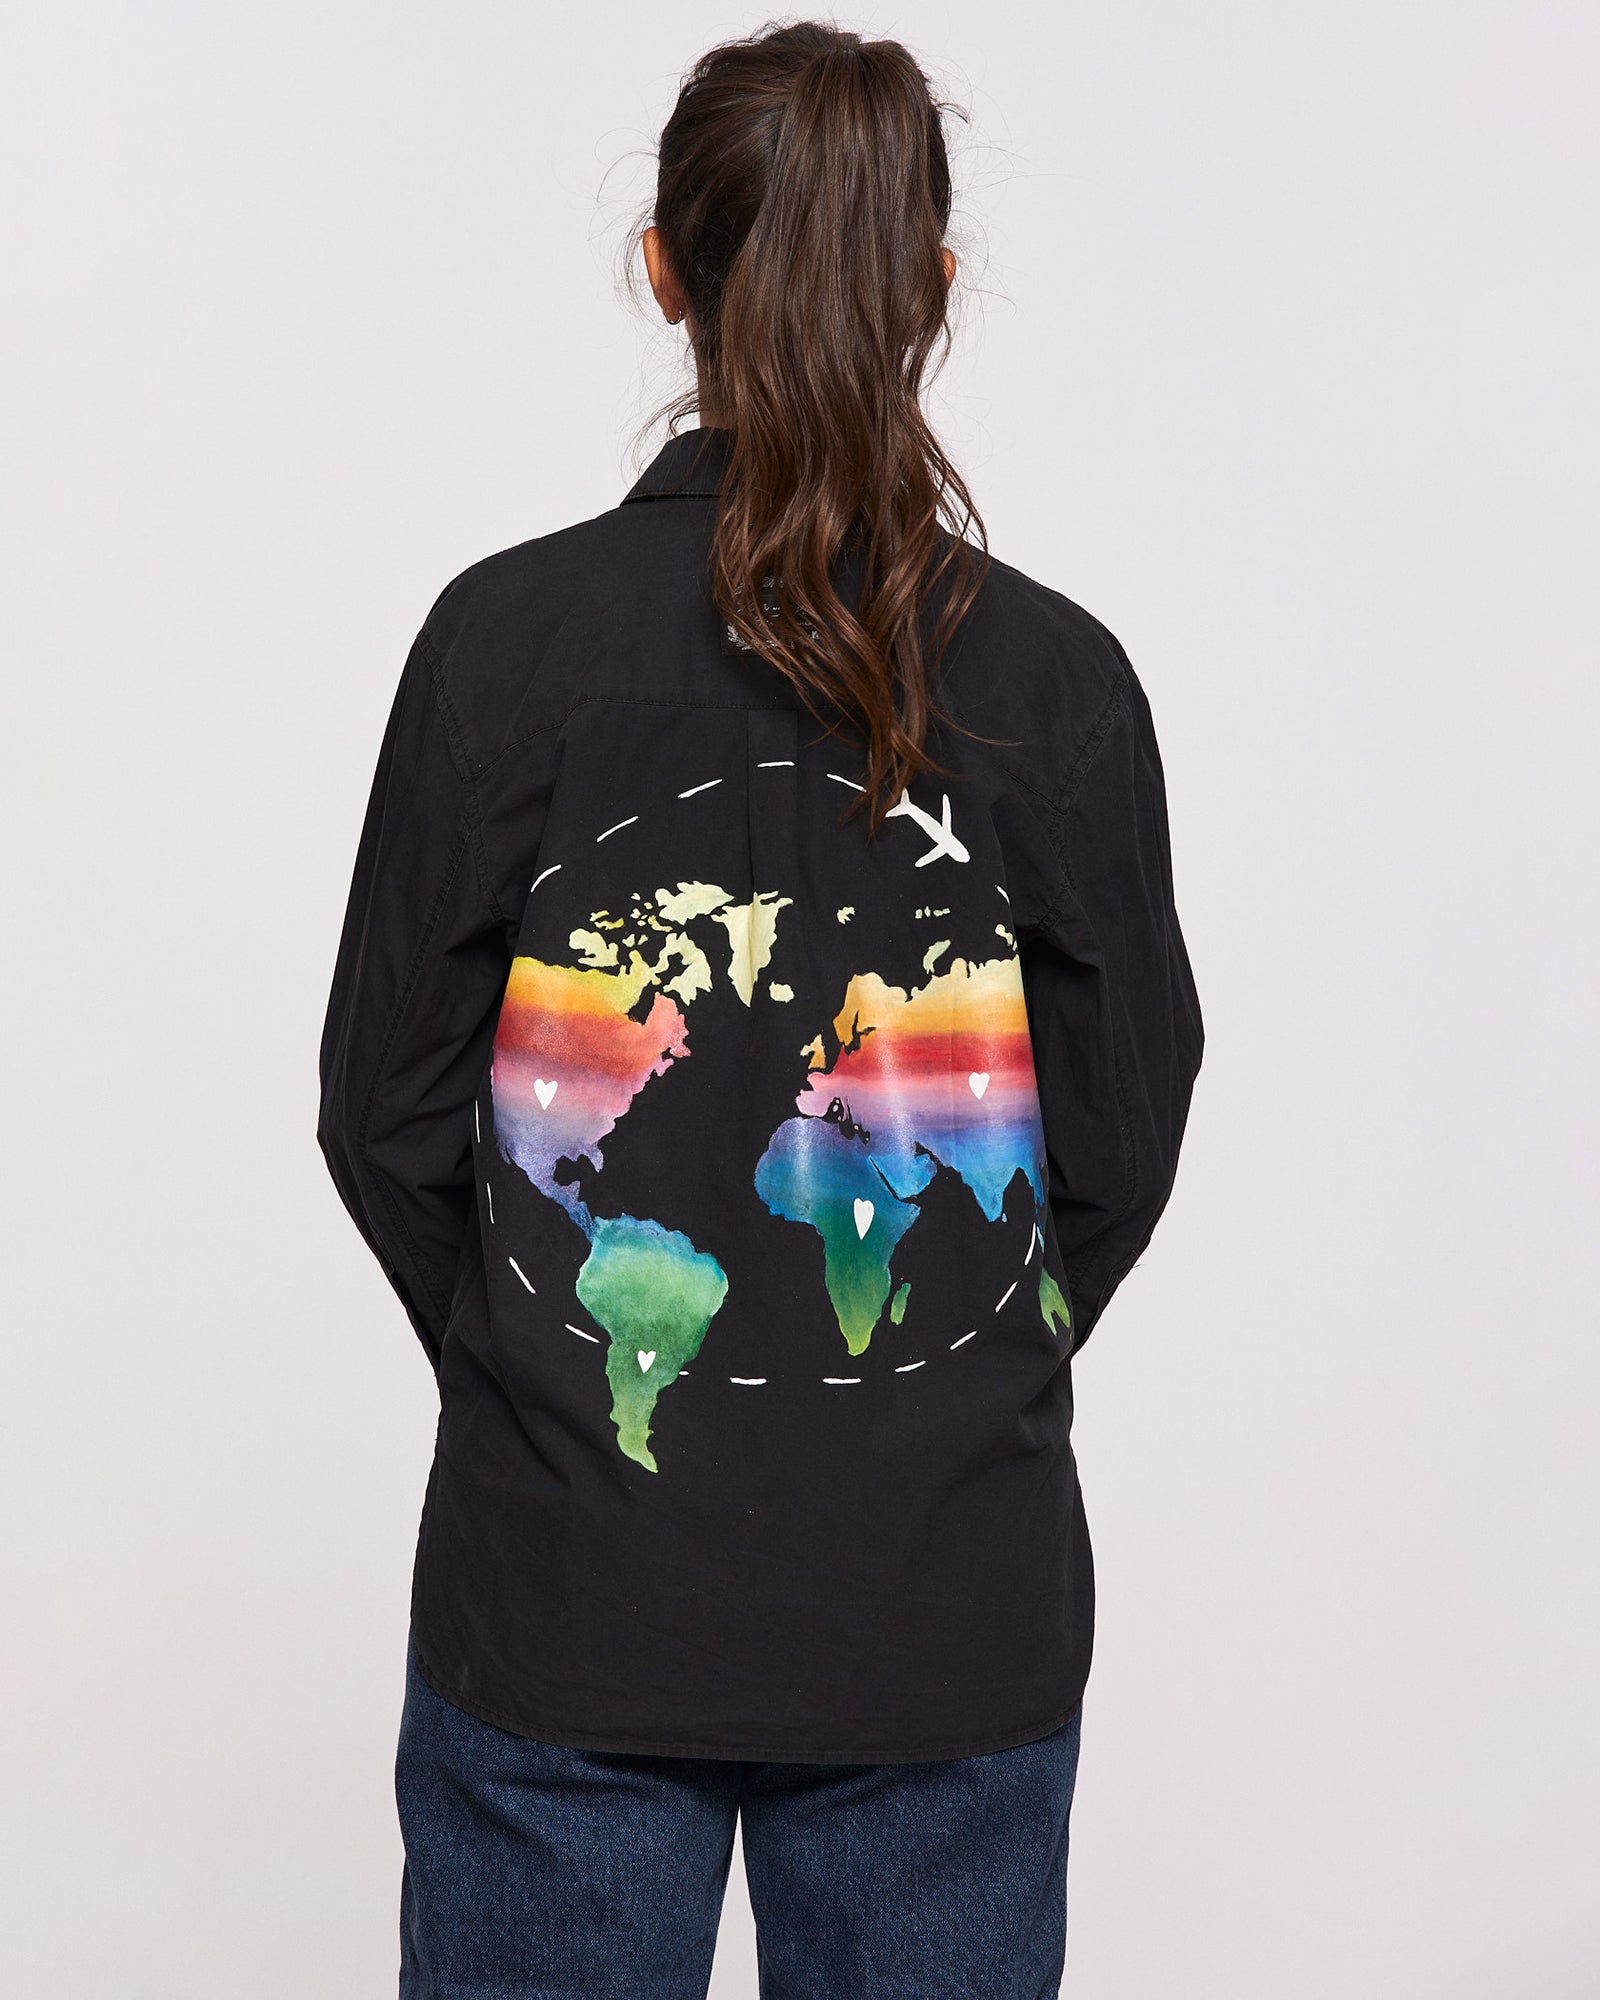 Hand painted shirt "What a wonderful world"''